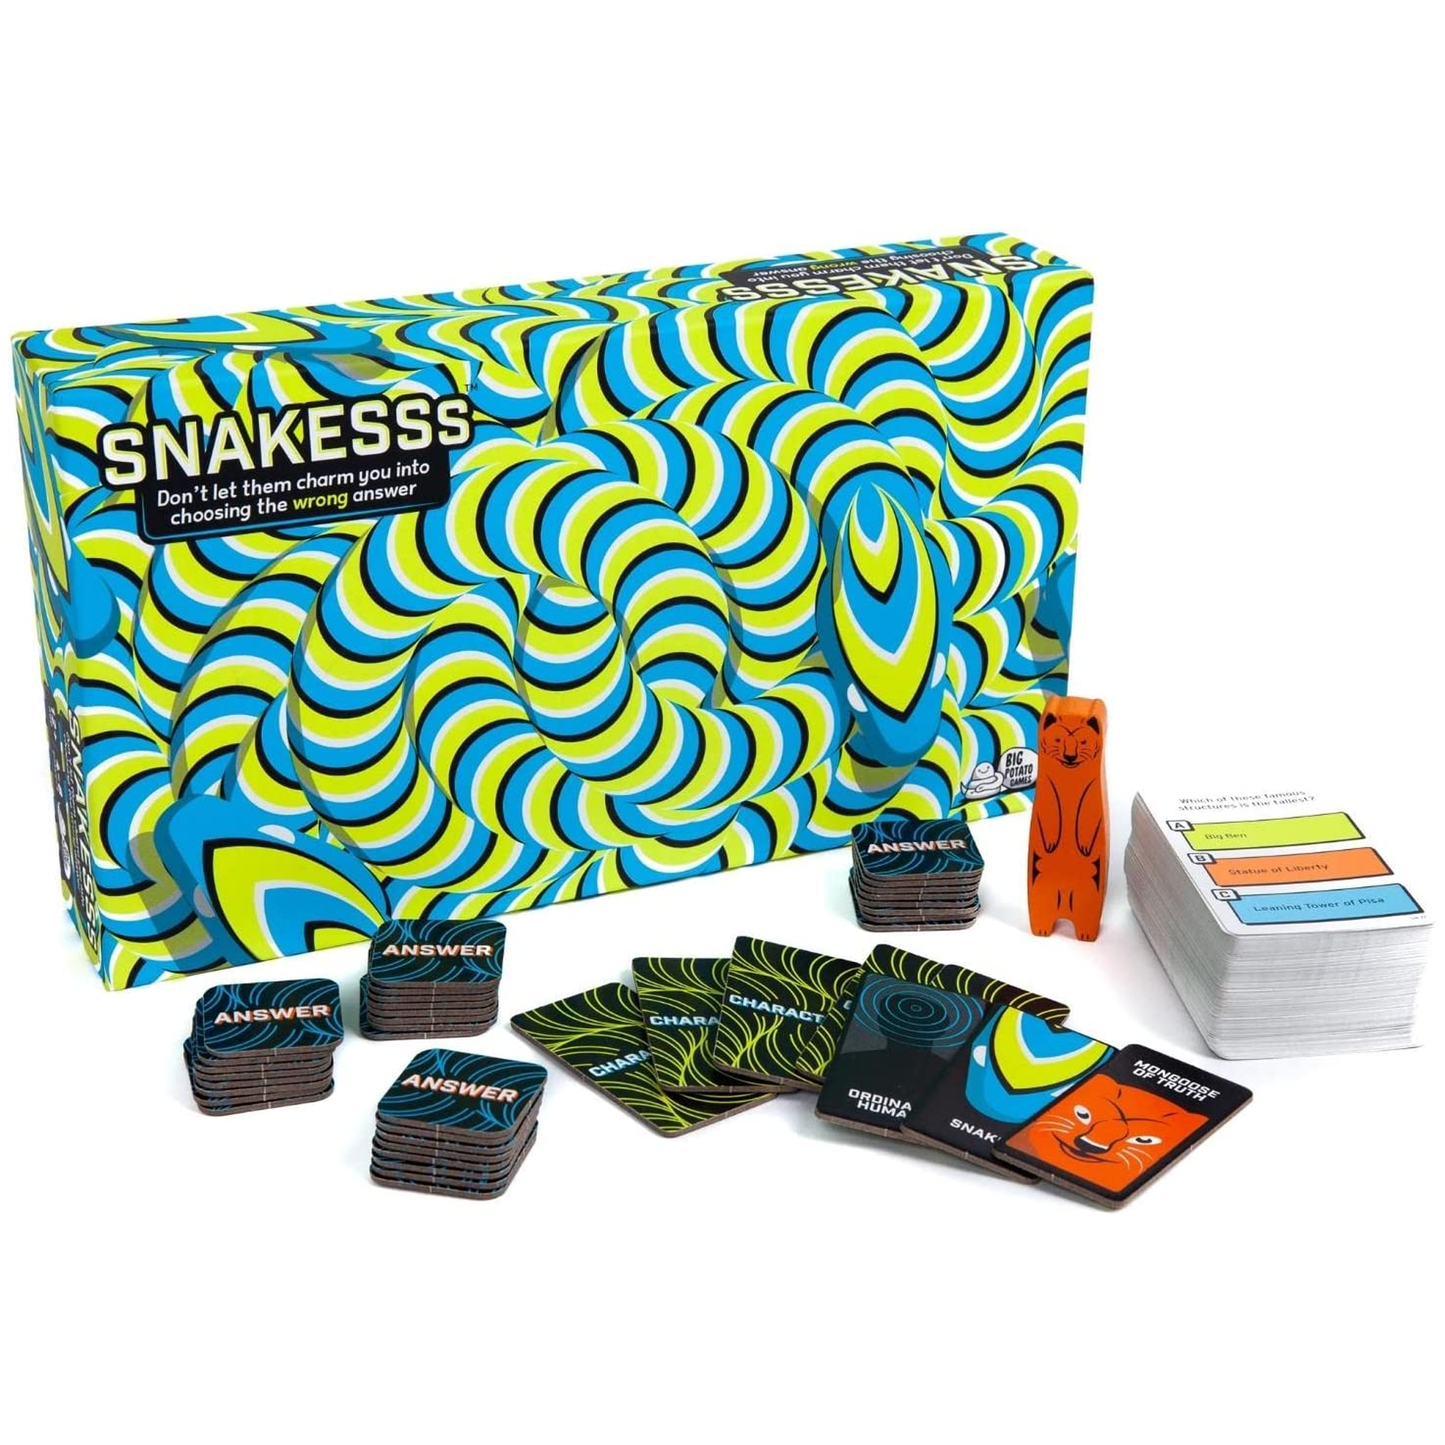 Snakesss Board Game Box and Contents | Happy Piranha